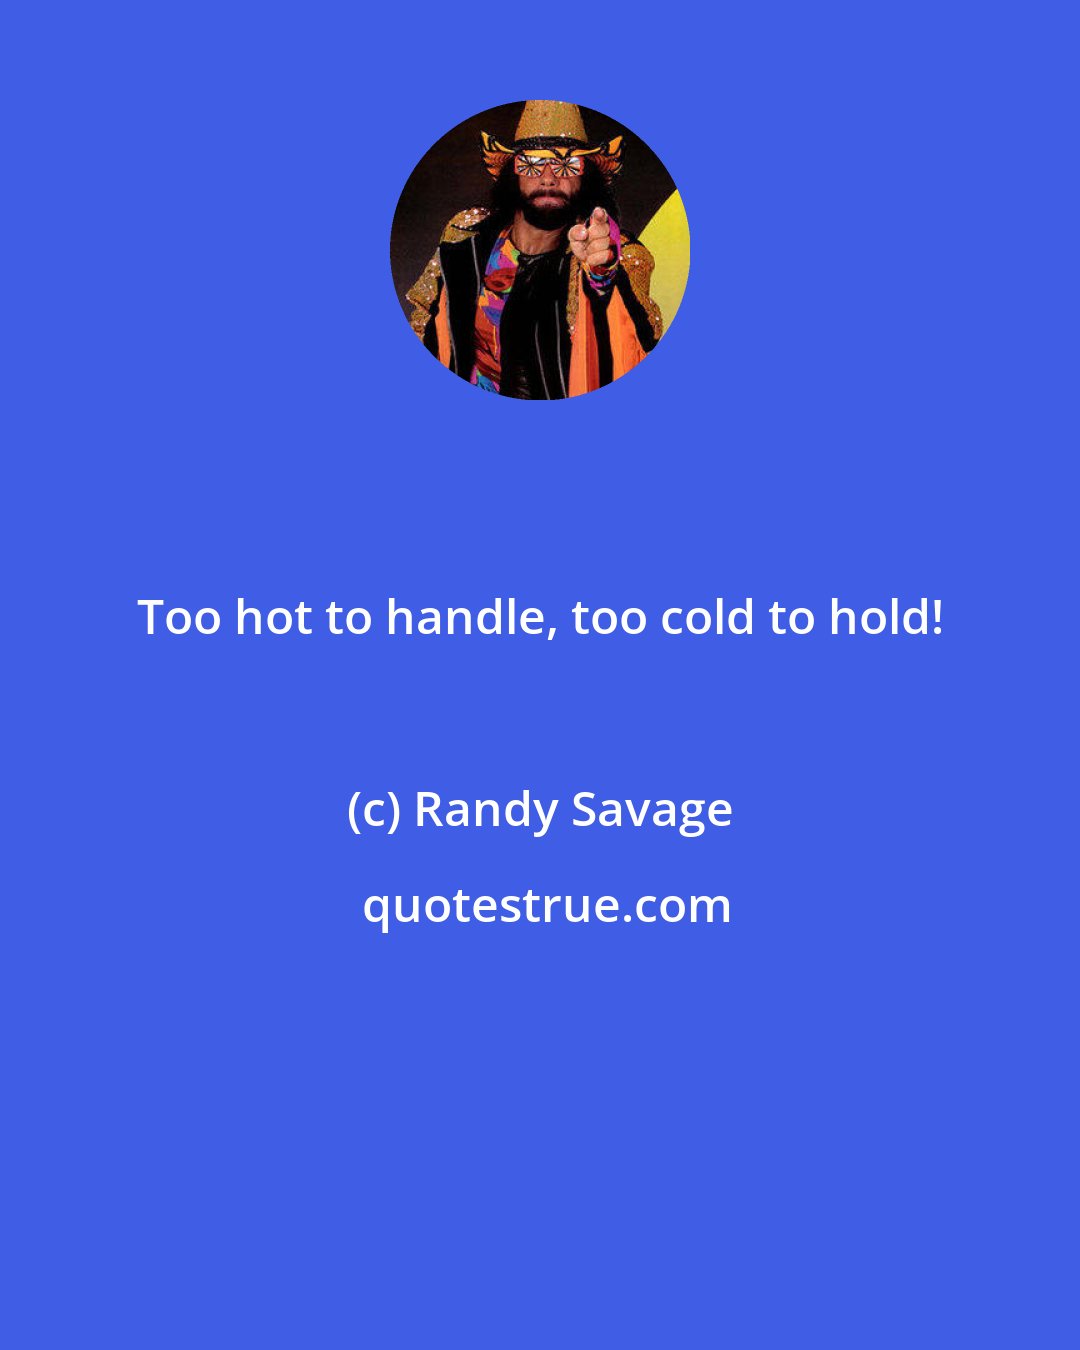 Randy Savage: Too hot to handle, too cold to hold!